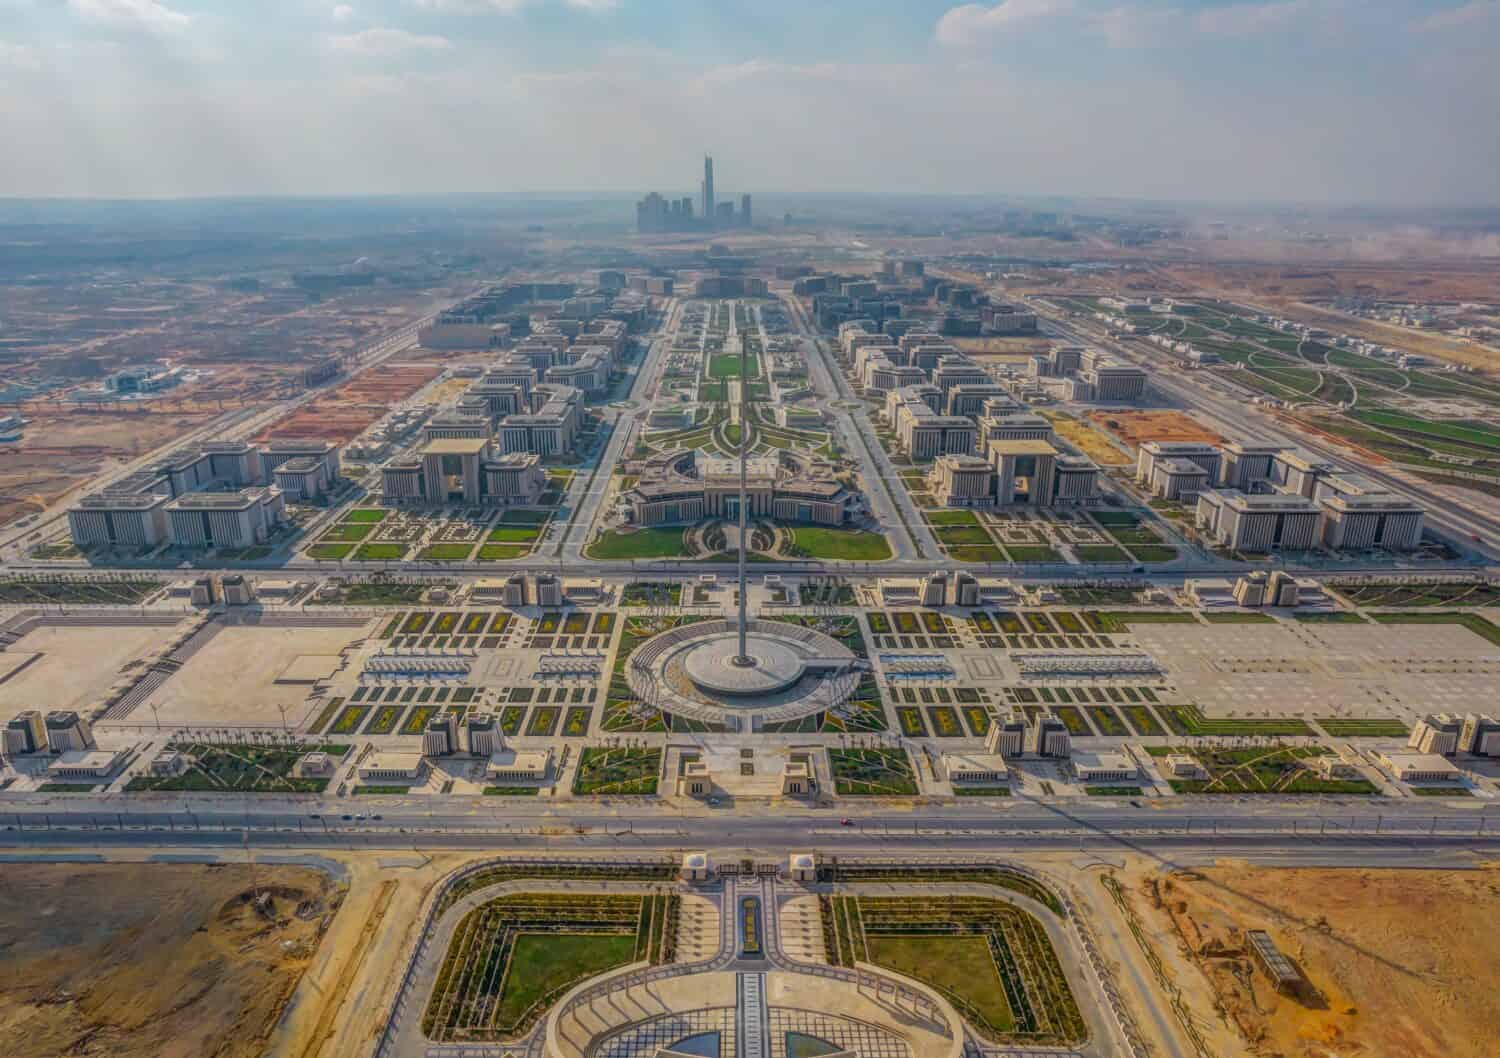 The government district and the ministries area in the new administrative capital, Egypt